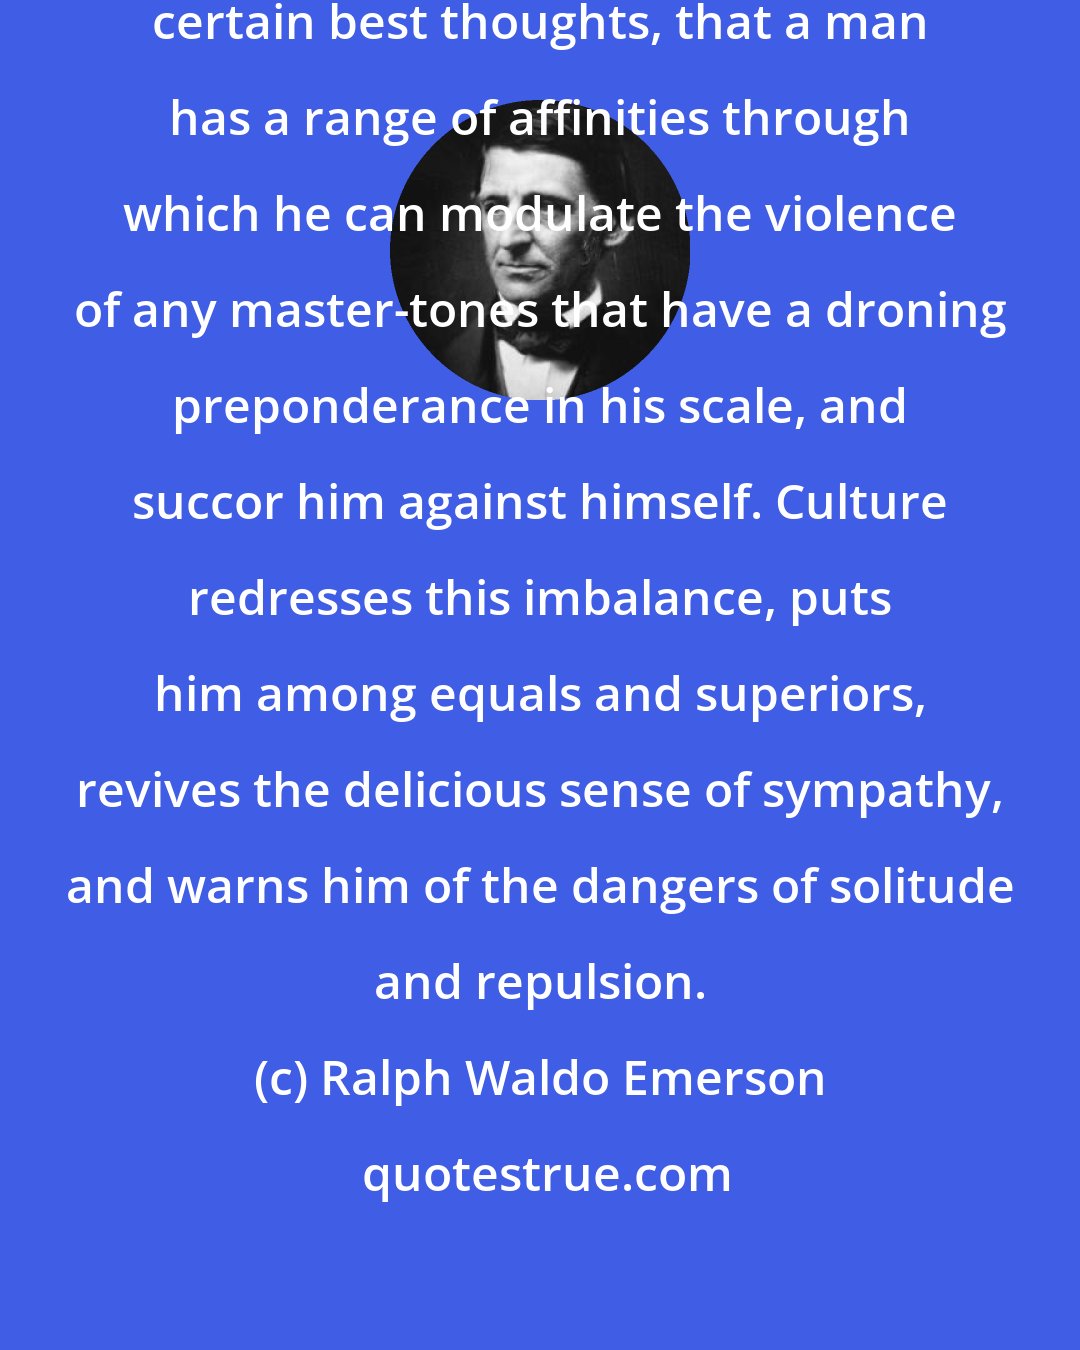 Ralph Waldo Emerson: Culture is the suggestion, from certain best thoughts, that a man has a range of affinities through which he can modulate the violence of any master-tones that have a droning preponderance in his scale, and succor him against himself. Culture redresses this imbalance, puts him among equals and superiors, revives the delicious sense of sympathy, and warns him of the dangers of solitude and repulsion.